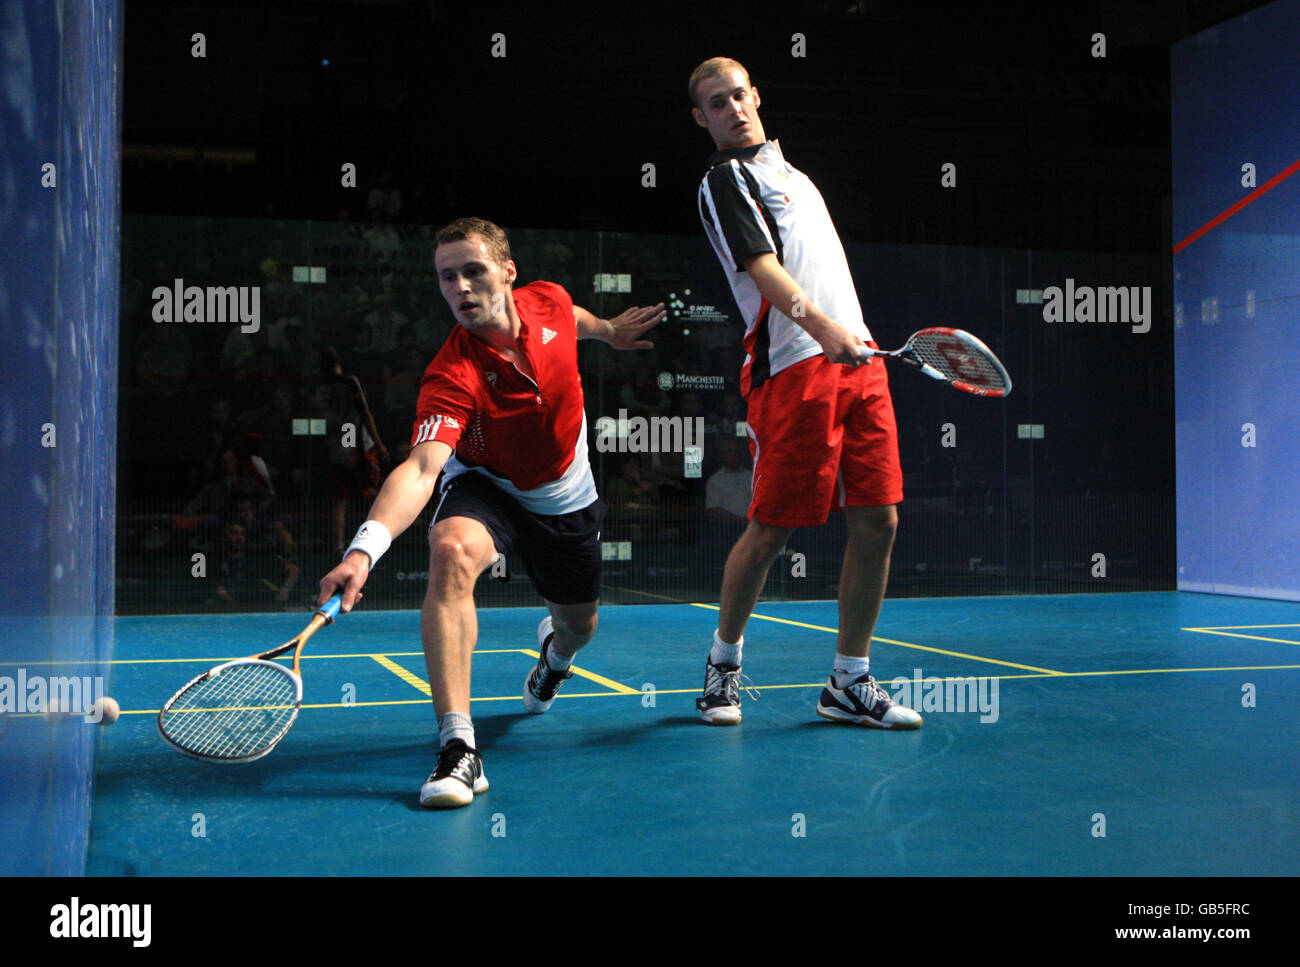 Squash - Hi-Tec World Squash Championships 2008 - National Squash Centre. France's Gregory Gaultier (red) on his way to beating Switzerland's Nicolas Mueller Stock Photo